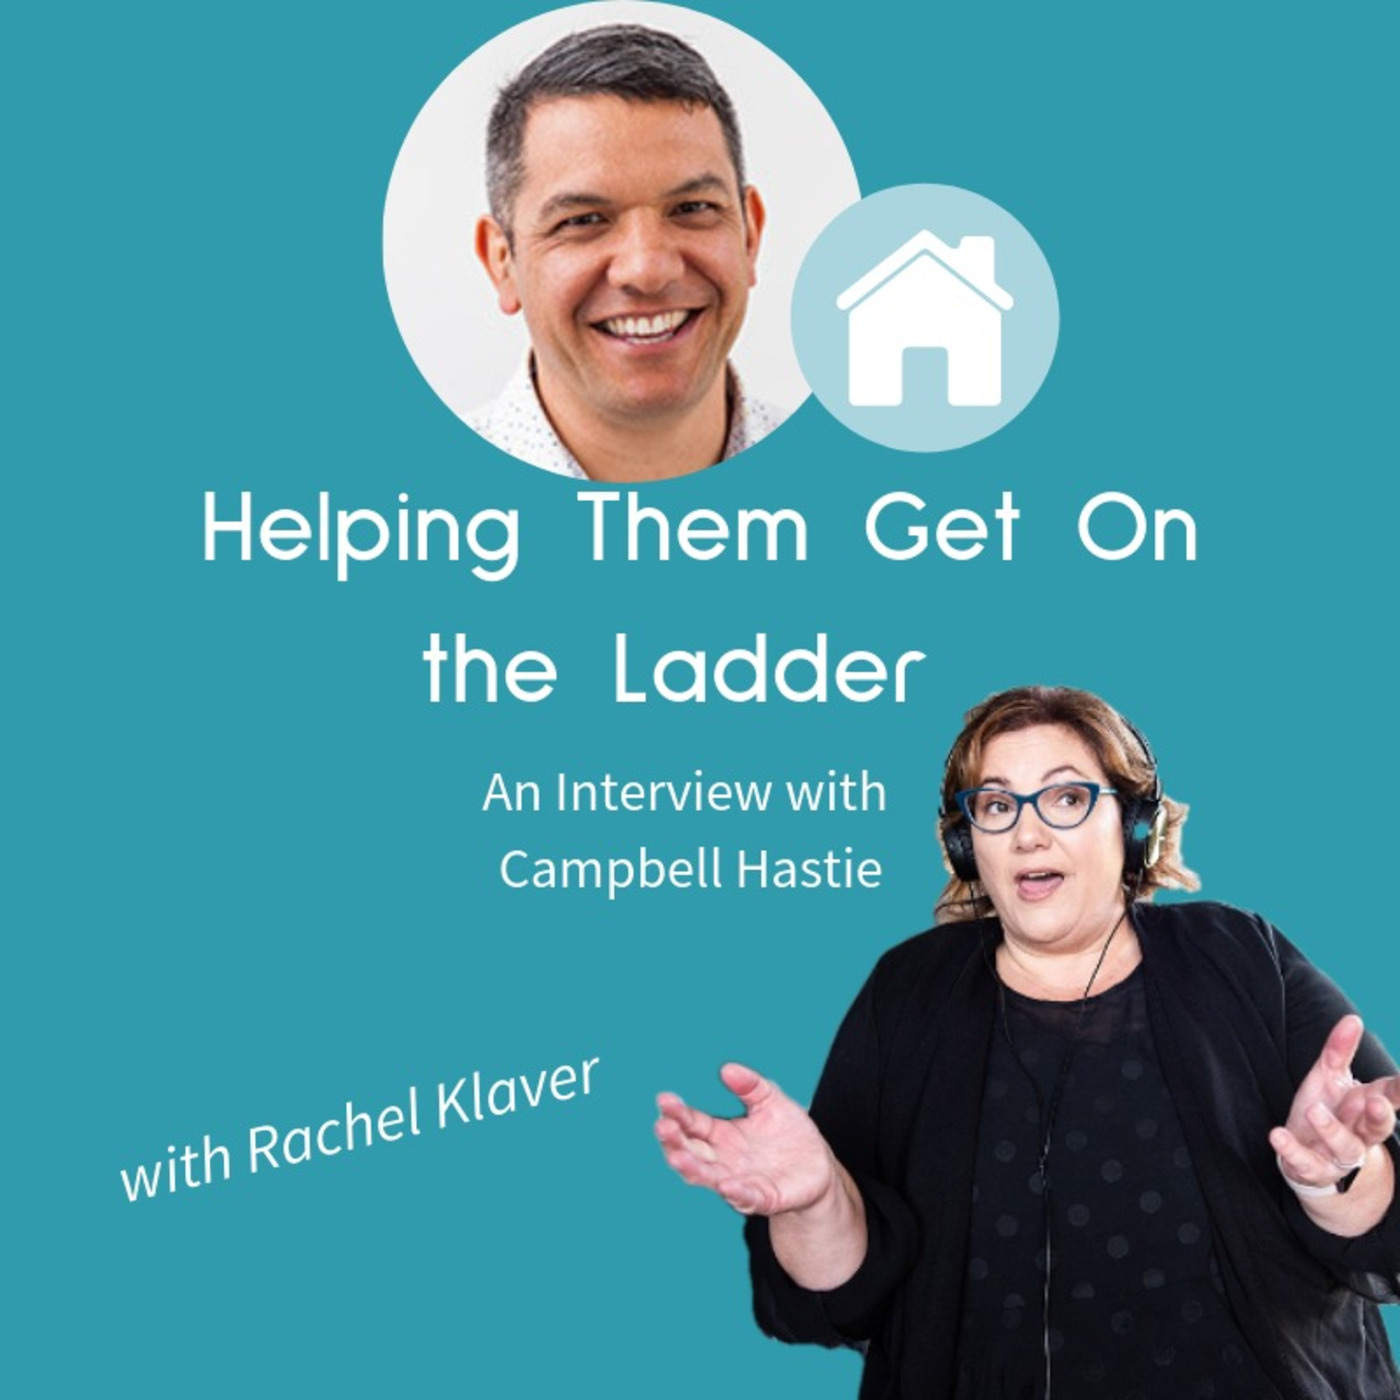 Helping Them Get On The Ladder - An interview with Campbell Hastie from Go2Guys